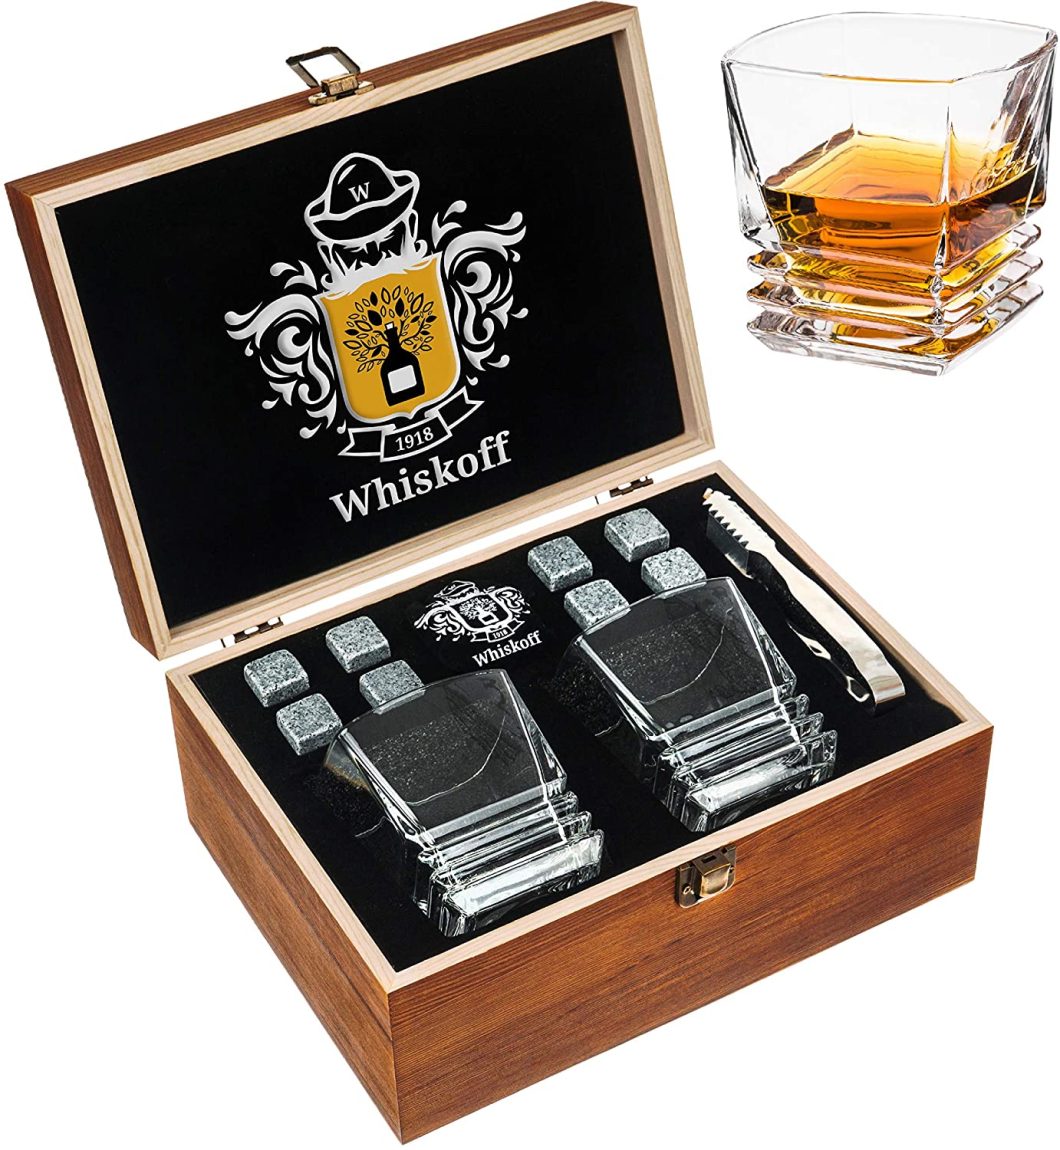 This gift set is a best seller! The reason is because it's made with great quality in mind. The wood box is attractive and not too odd with its lettering.The glasses appeared to be of quality, and not too thin with heavy bottom and good grip. It is a simple hinged wood box with a swing clasp closure.